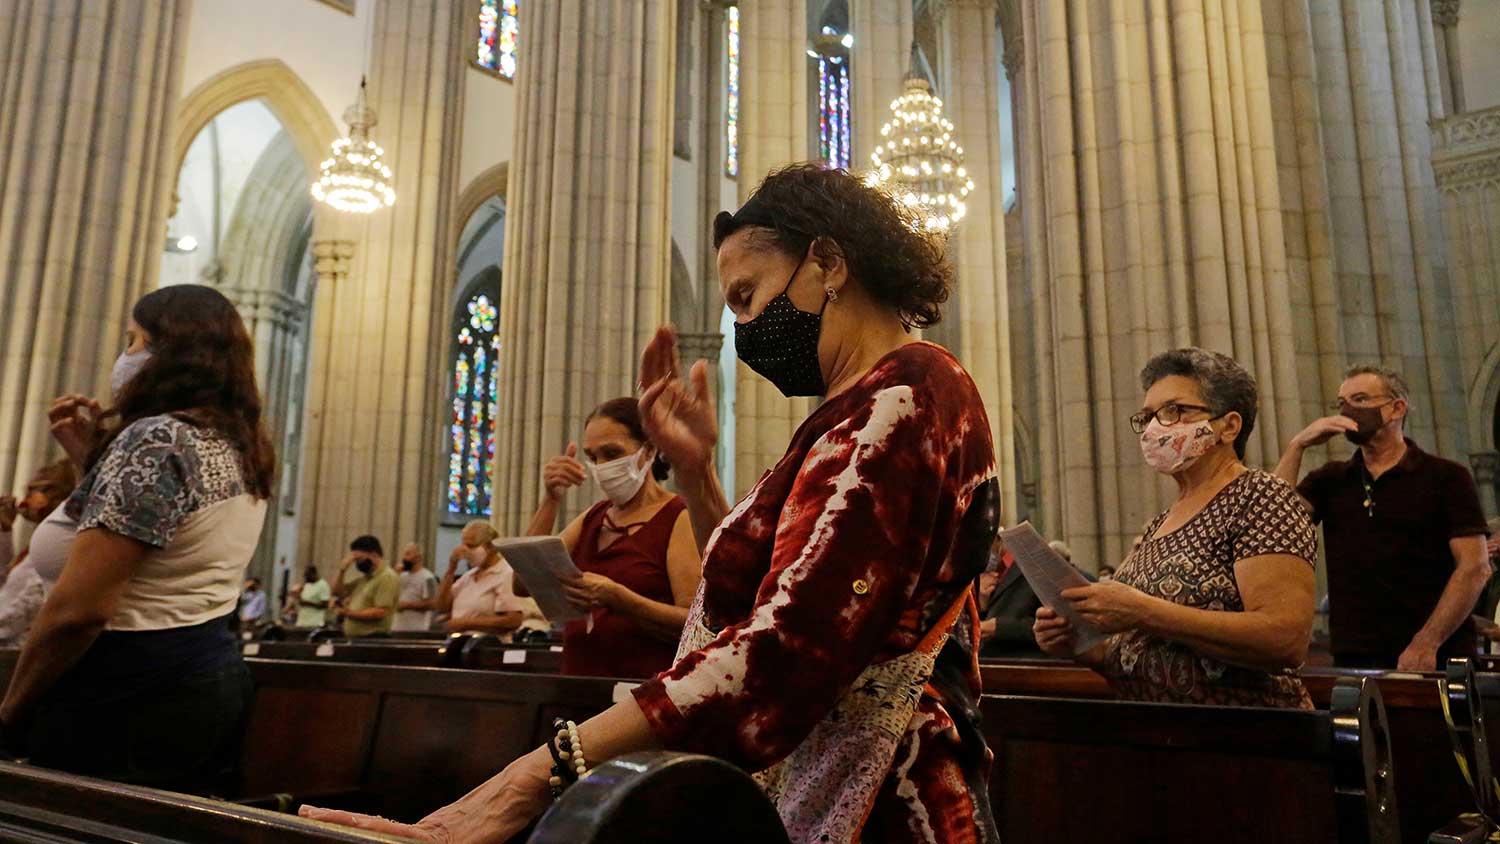 Church goers attend mass during the pandemic